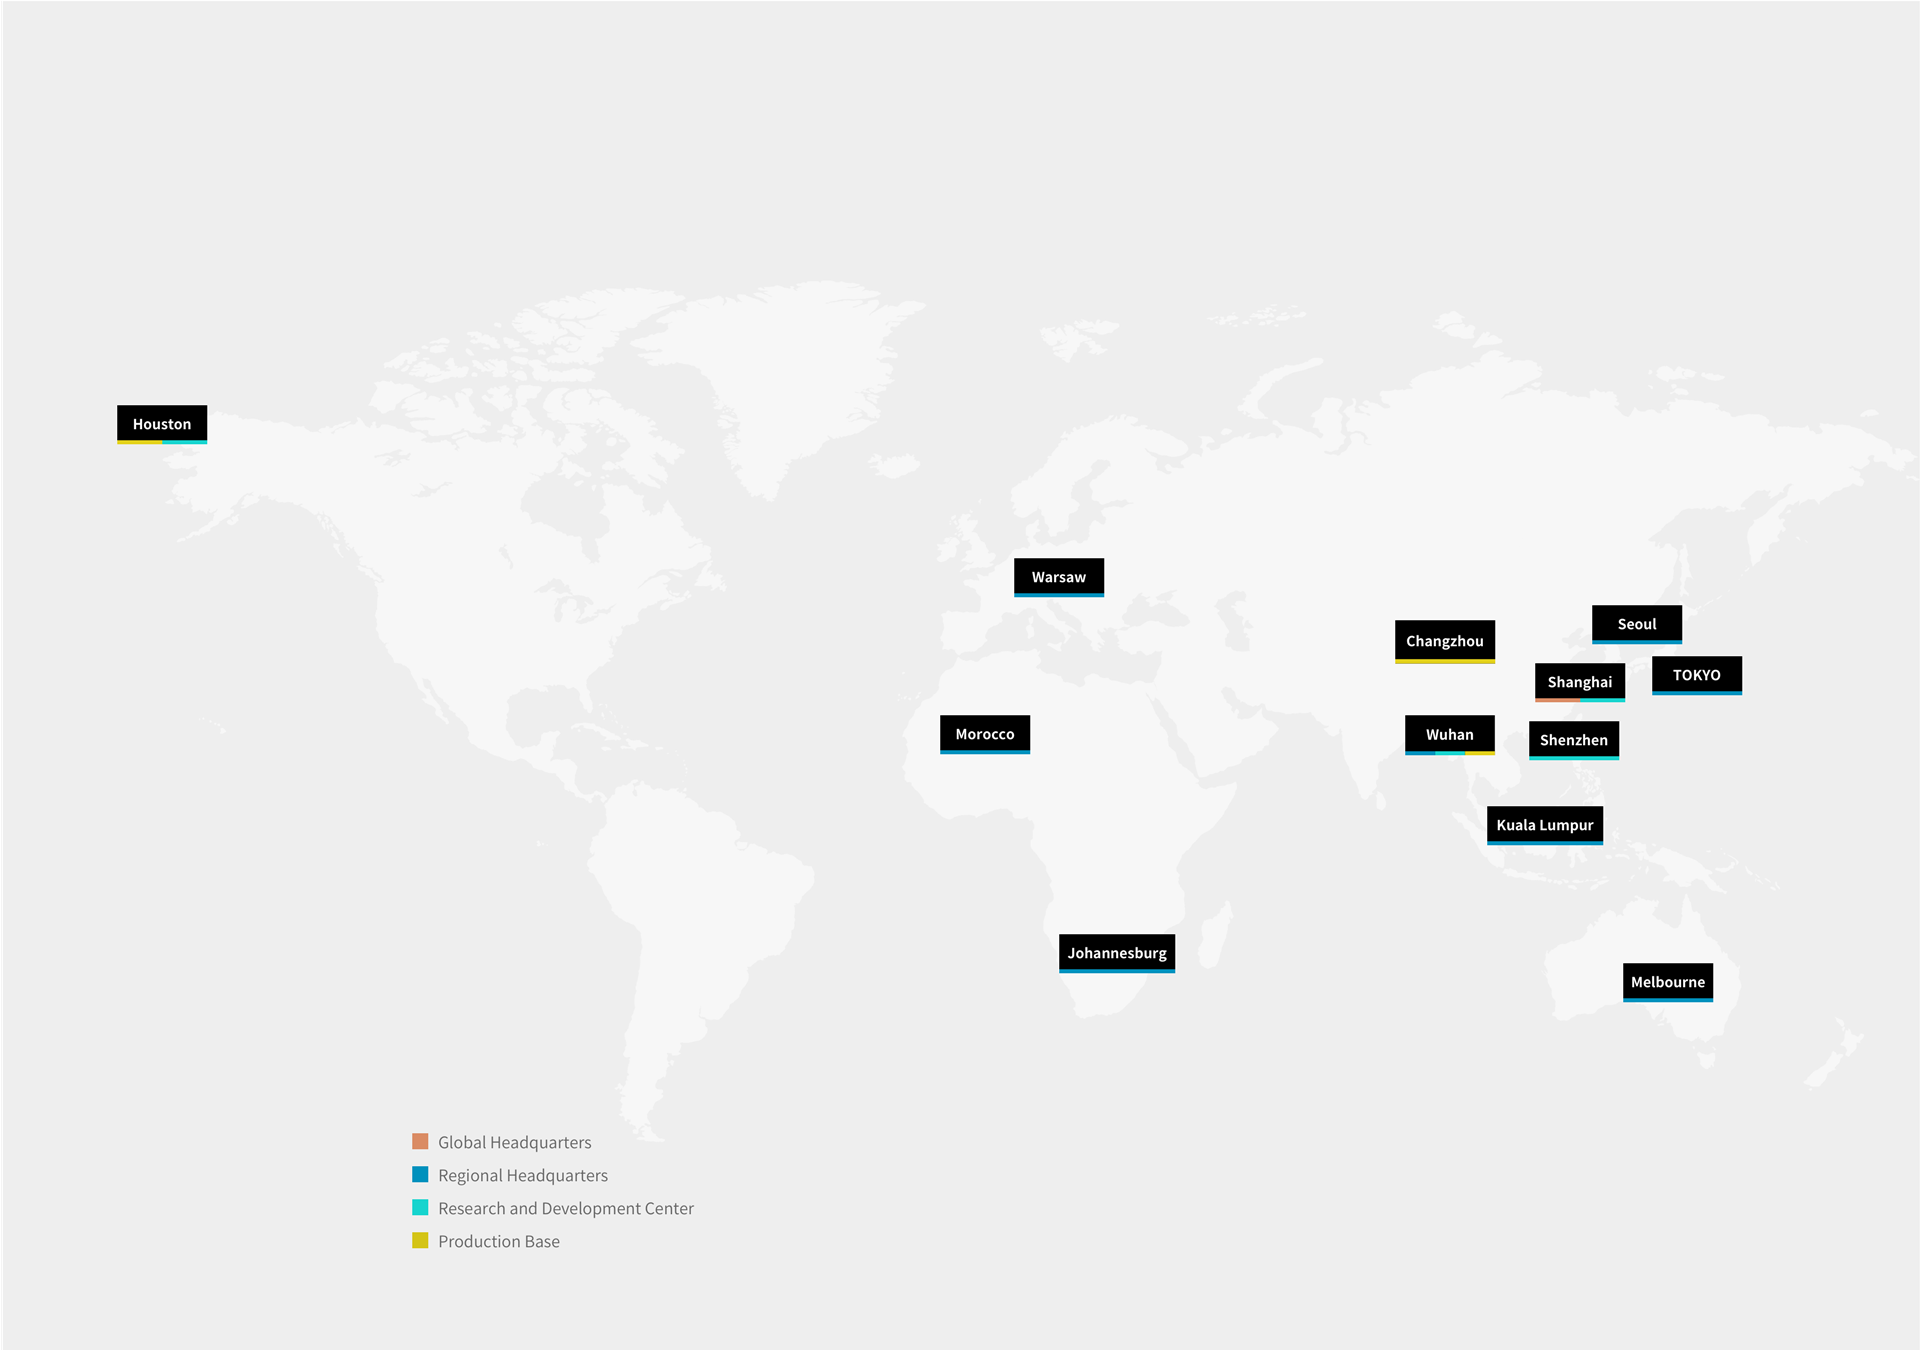 The global layout of United Imaging Healthcare from Shanghai, China, to the rest of the world.